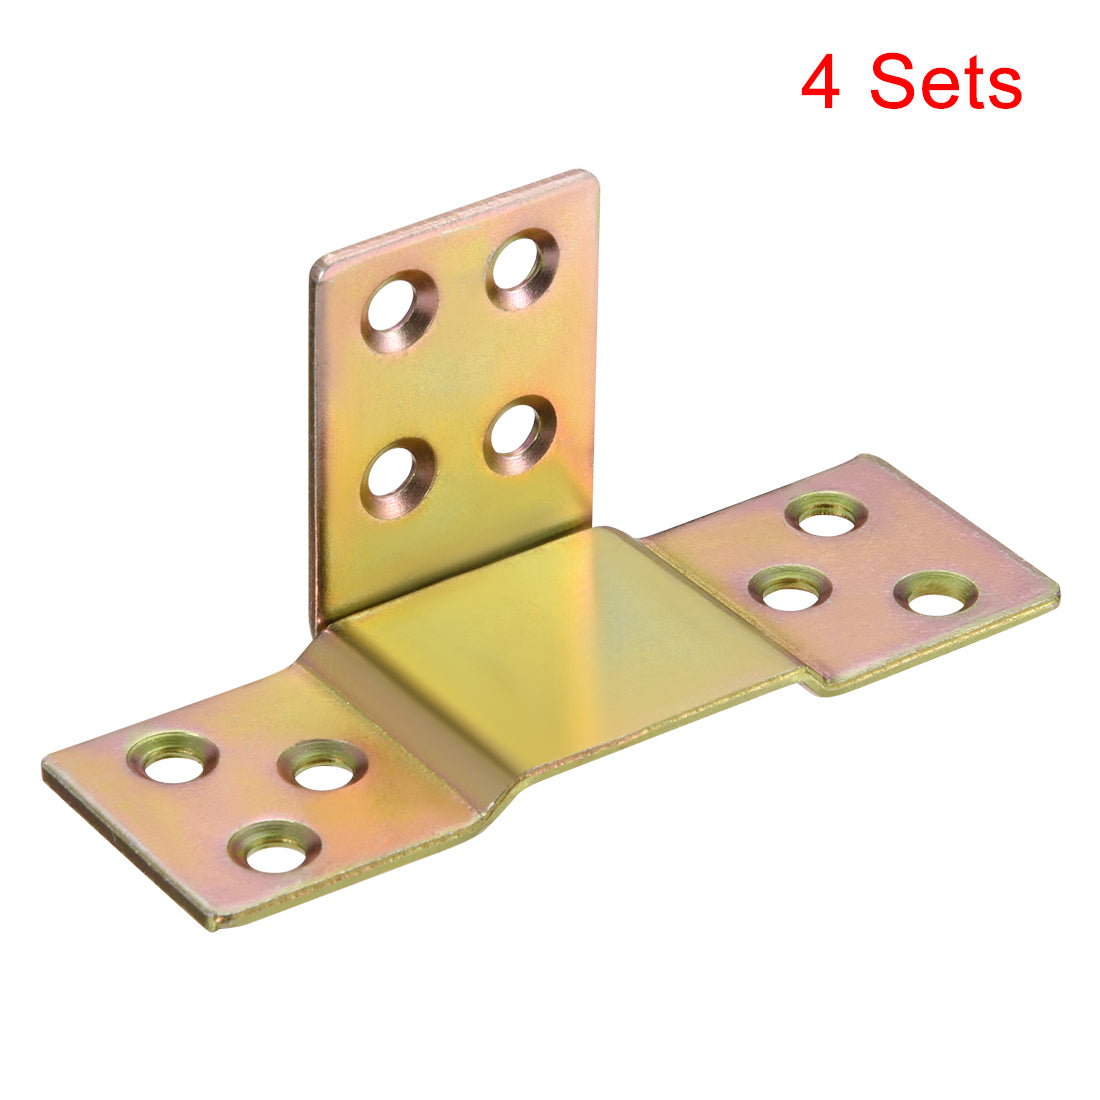 uxcell Uxcell Wood Bed Rail Metal Bracket Fastener Fitting Color zinc 4 Sets